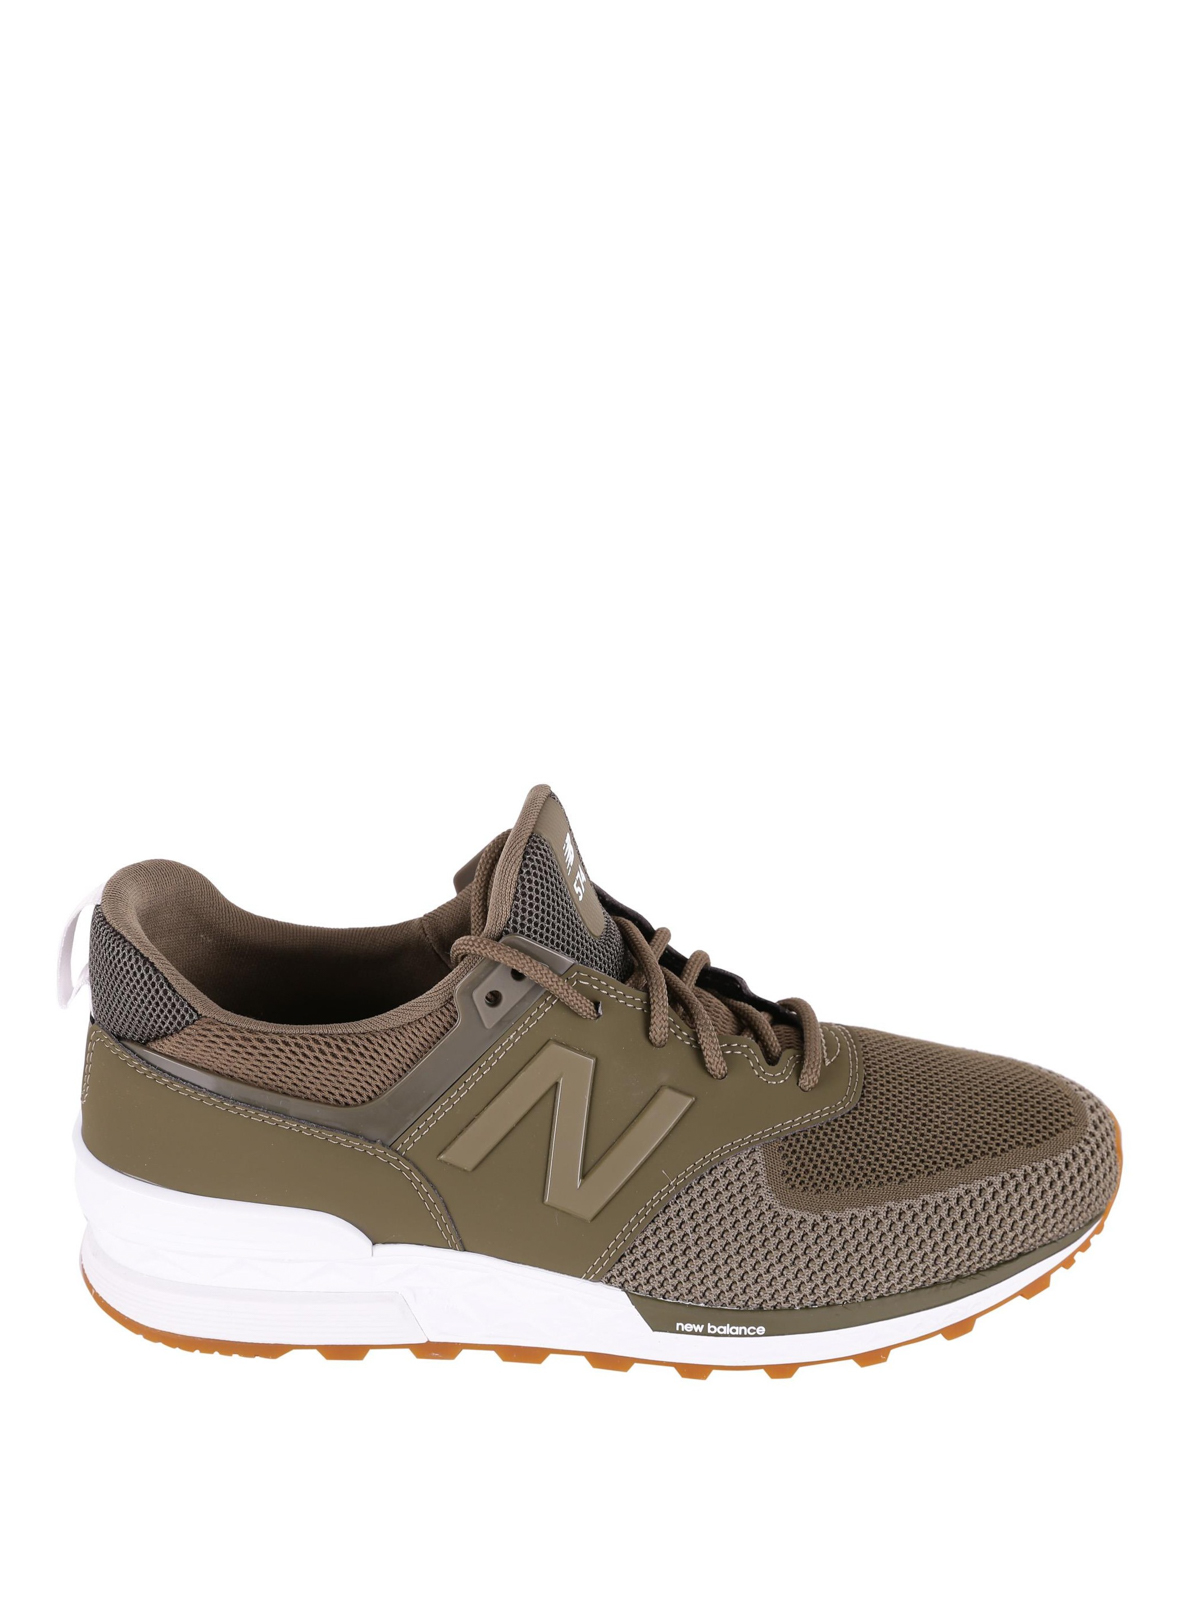 new balance army green sneakers